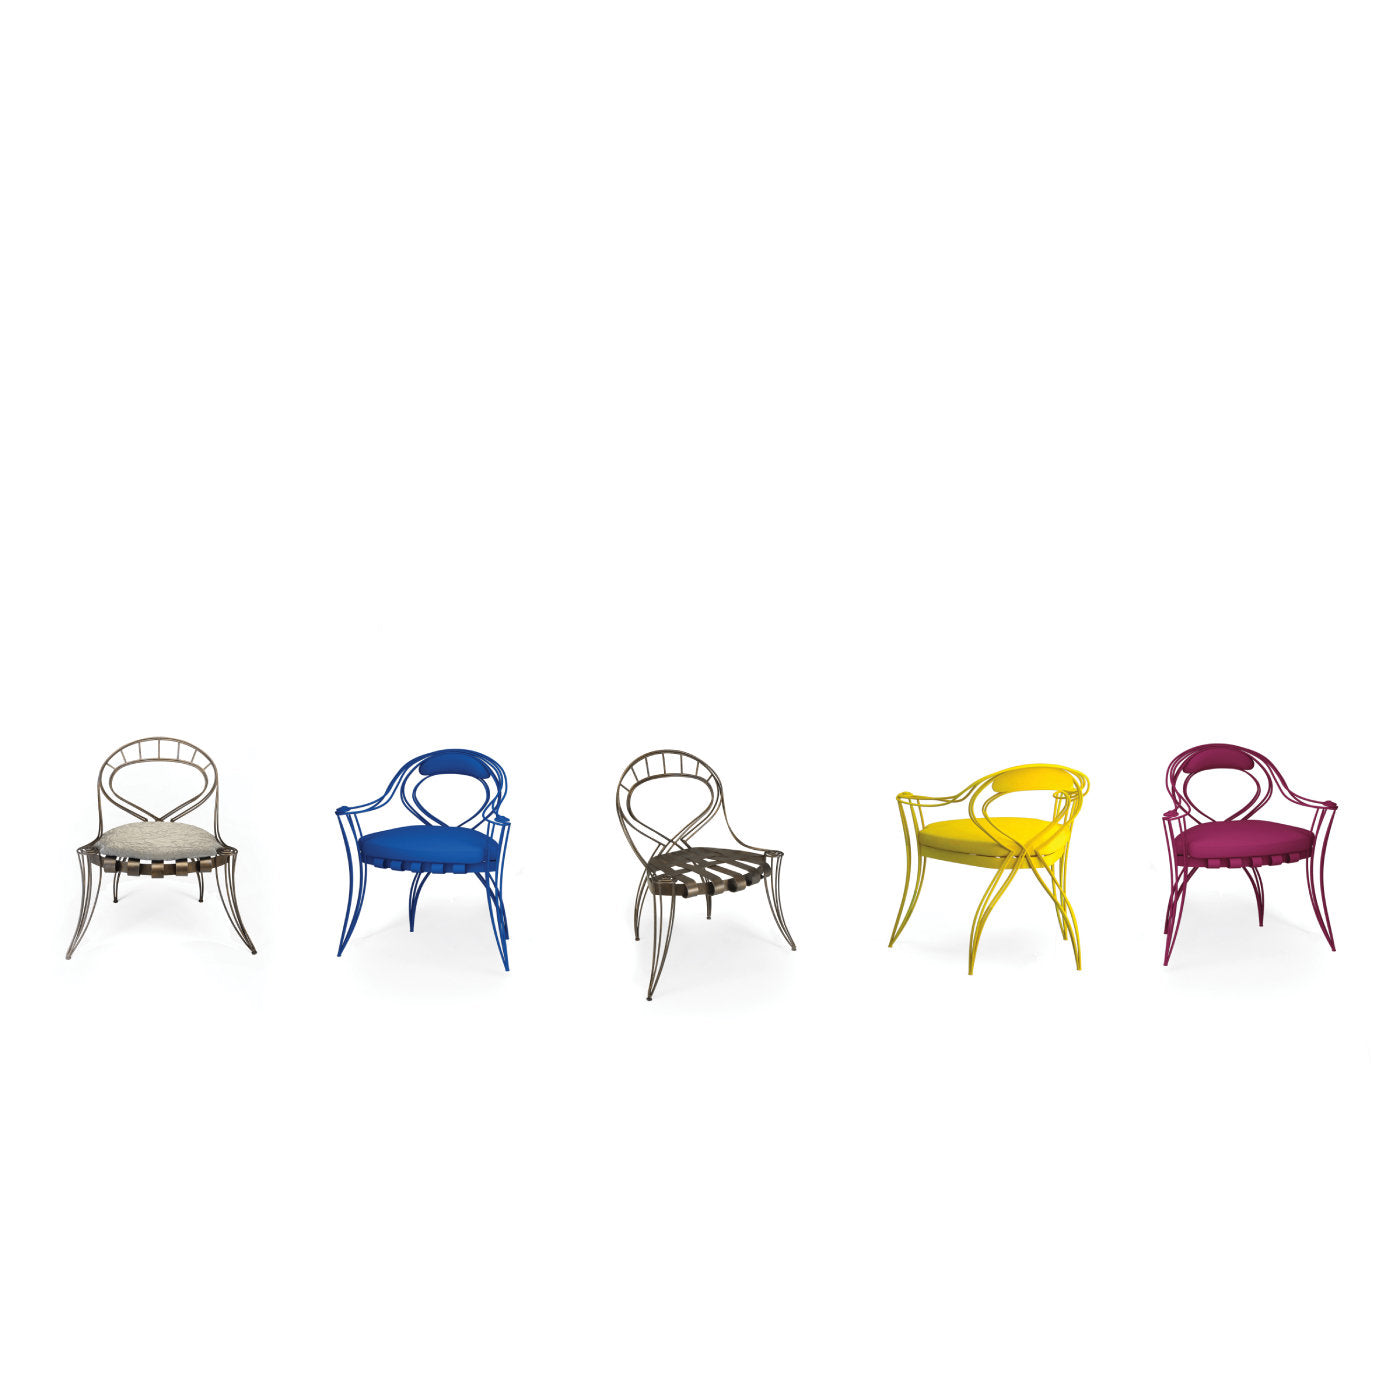 Opus Garden Magenta Chair with Armrests by Carlo Rampazzi - Alternative view 2